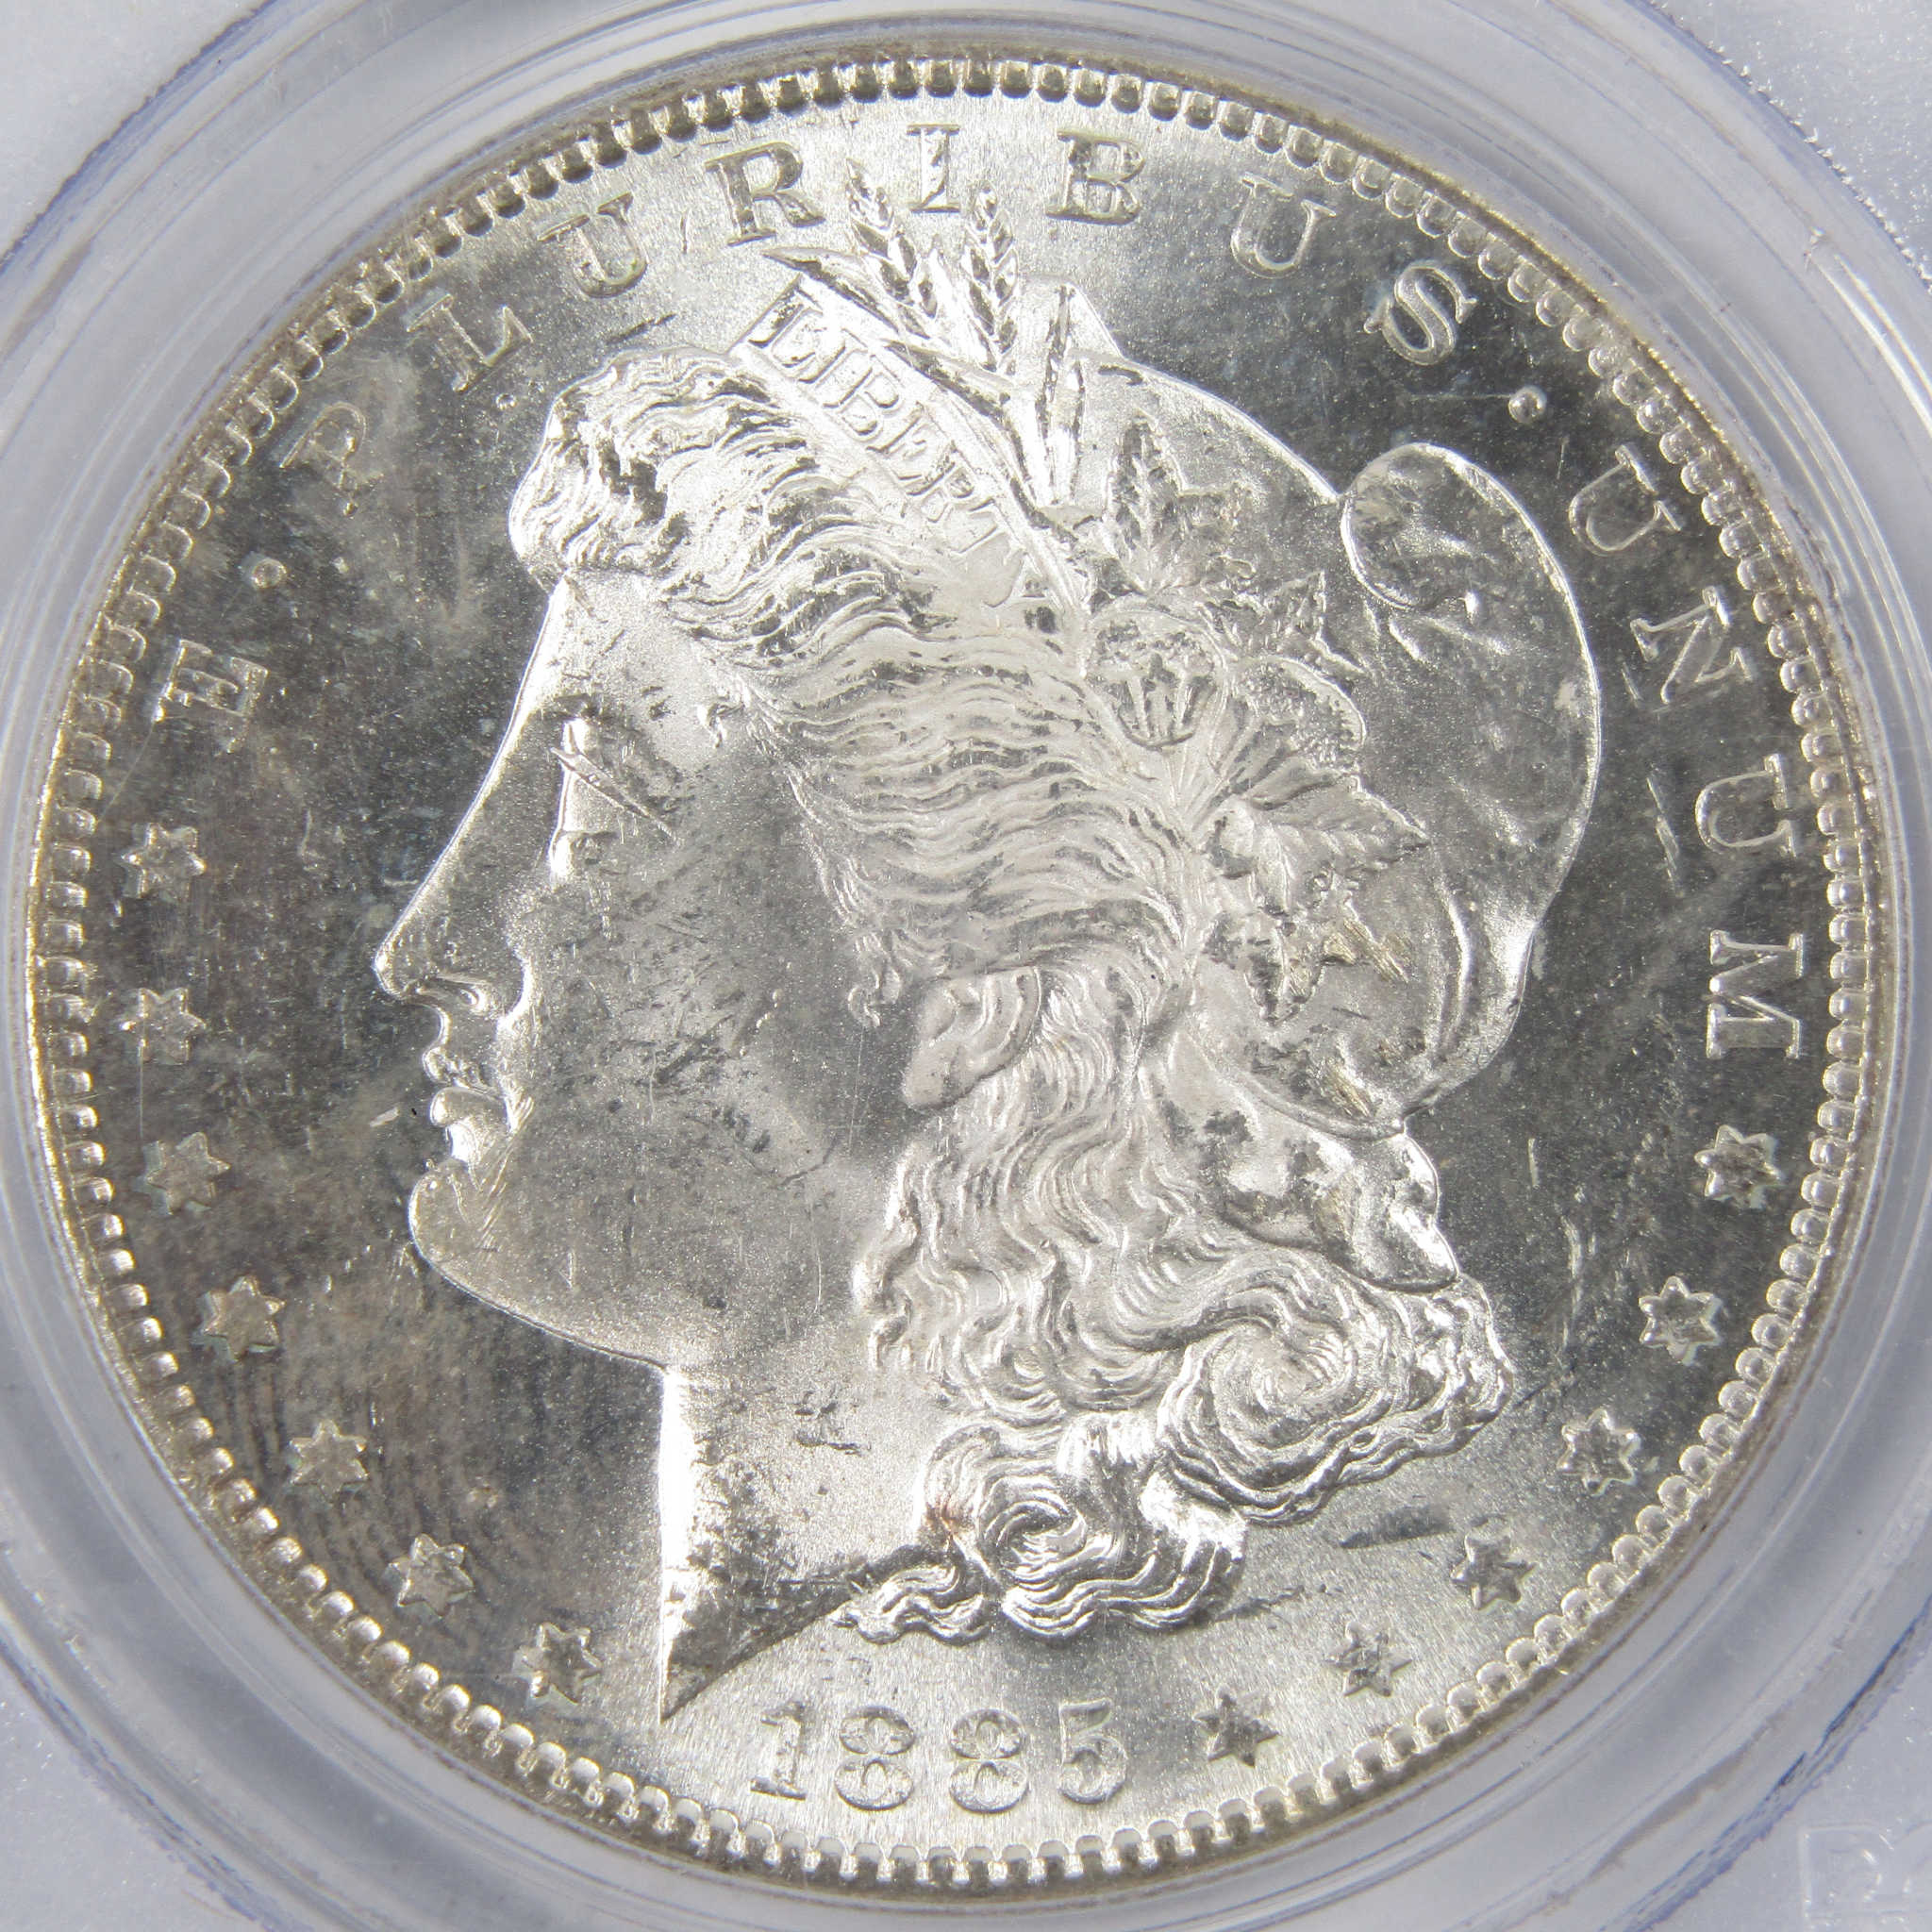 1885 S Morgan Dollar MS 63 PCGS 90% Silver $1 Coin SKU:I9735 - Morgan coin - Morgan silver dollar - Morgan silver dollar for sale - Profile Coins &amp; Collectibles